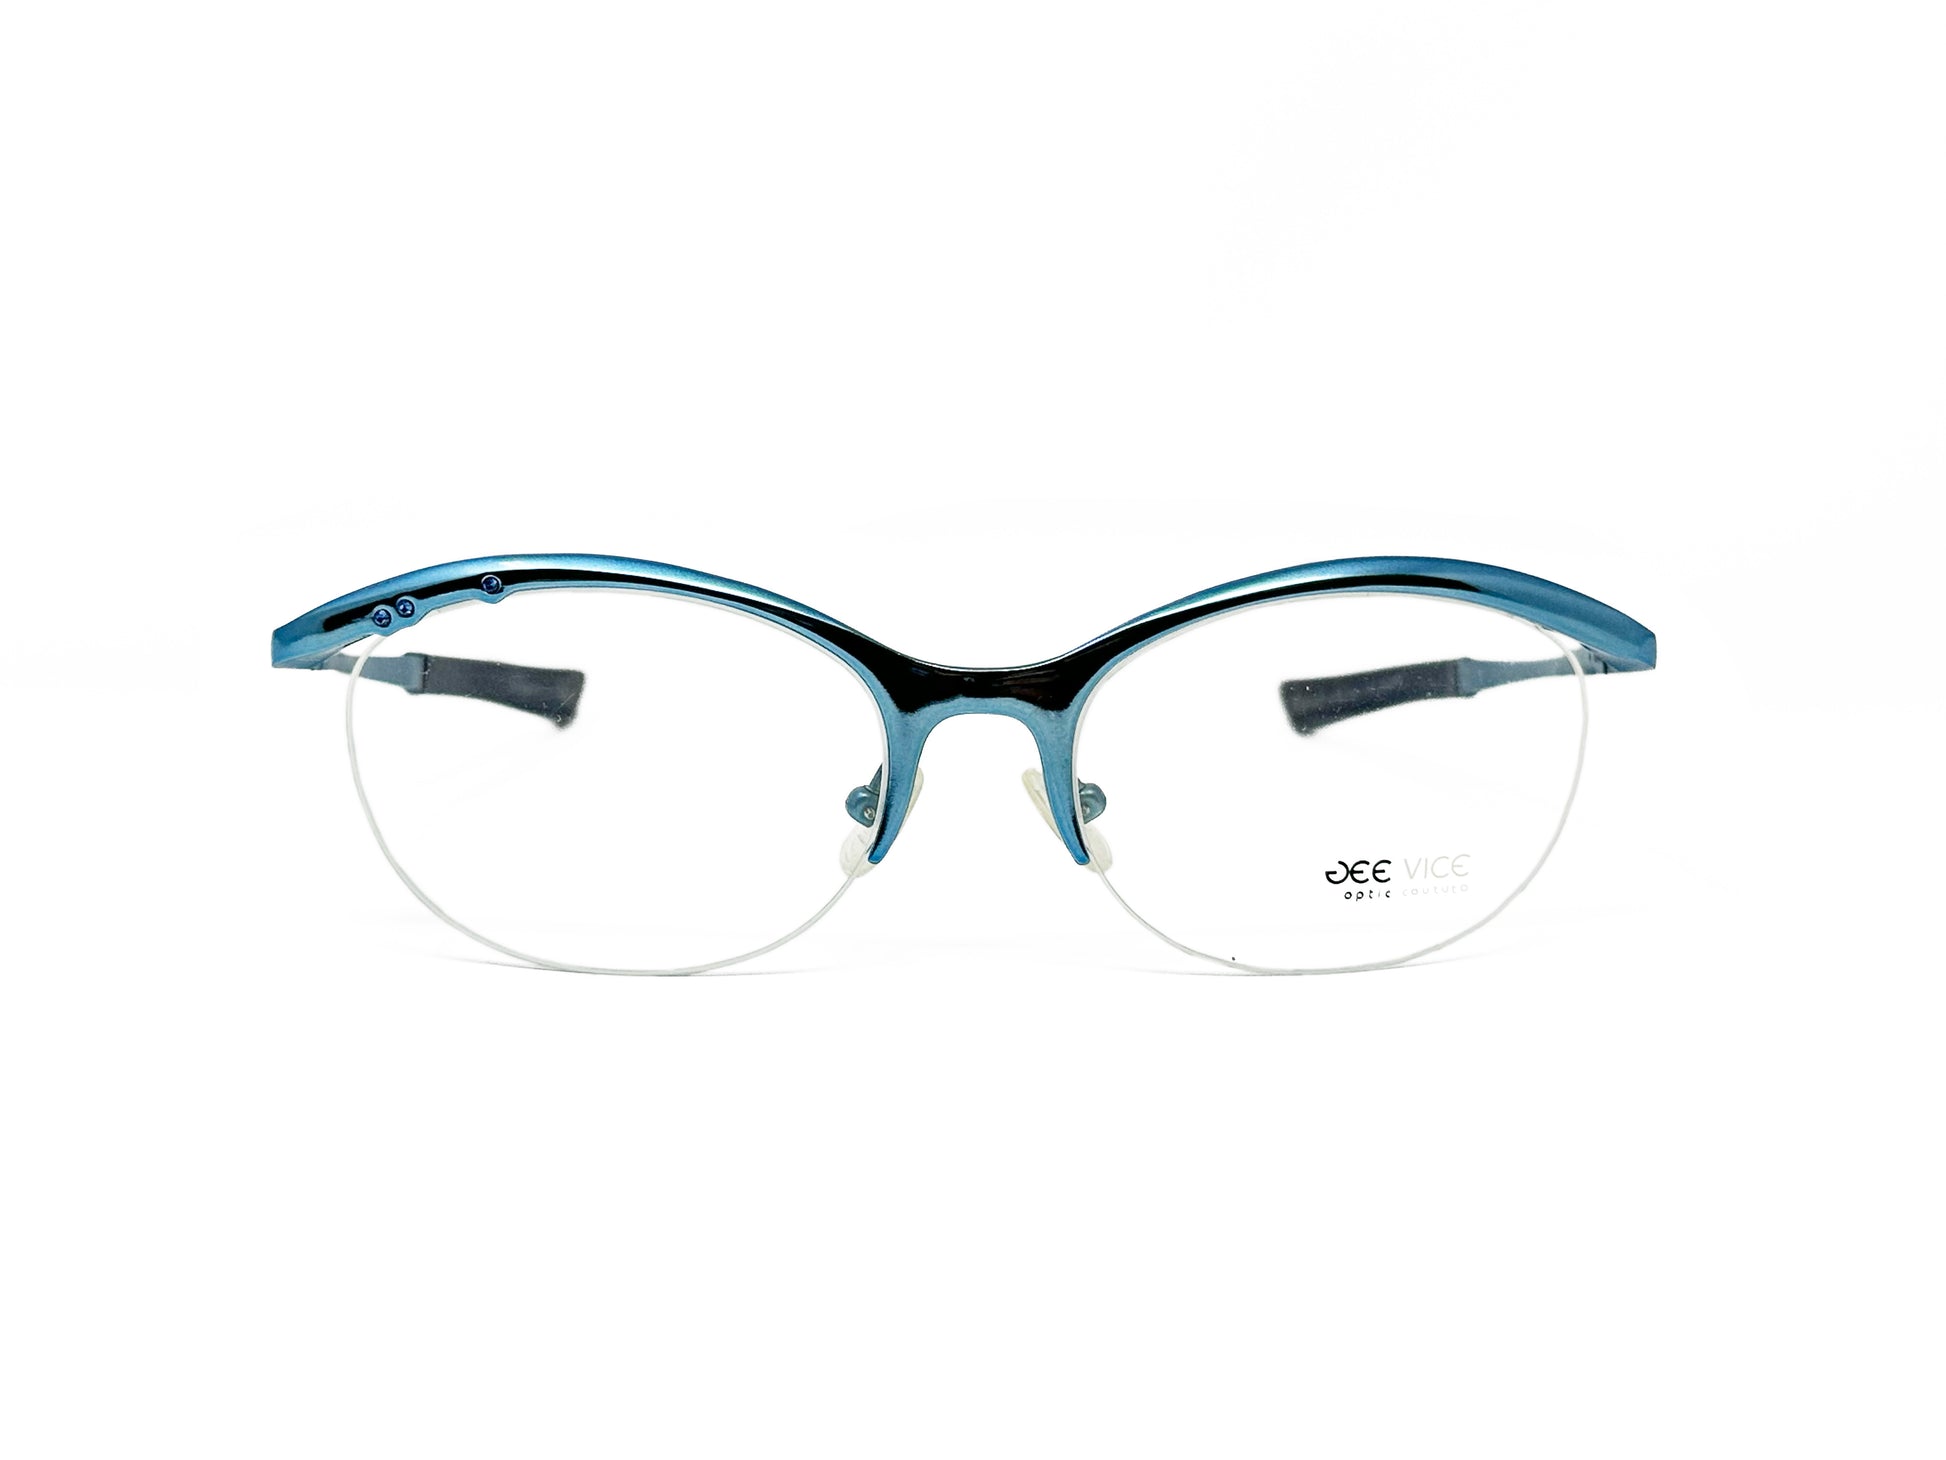 Gee Vice upliftwd-oval, half rim, metal, optical frame. Model: Fantasy. Color: Metallic icey blue. Front view. 